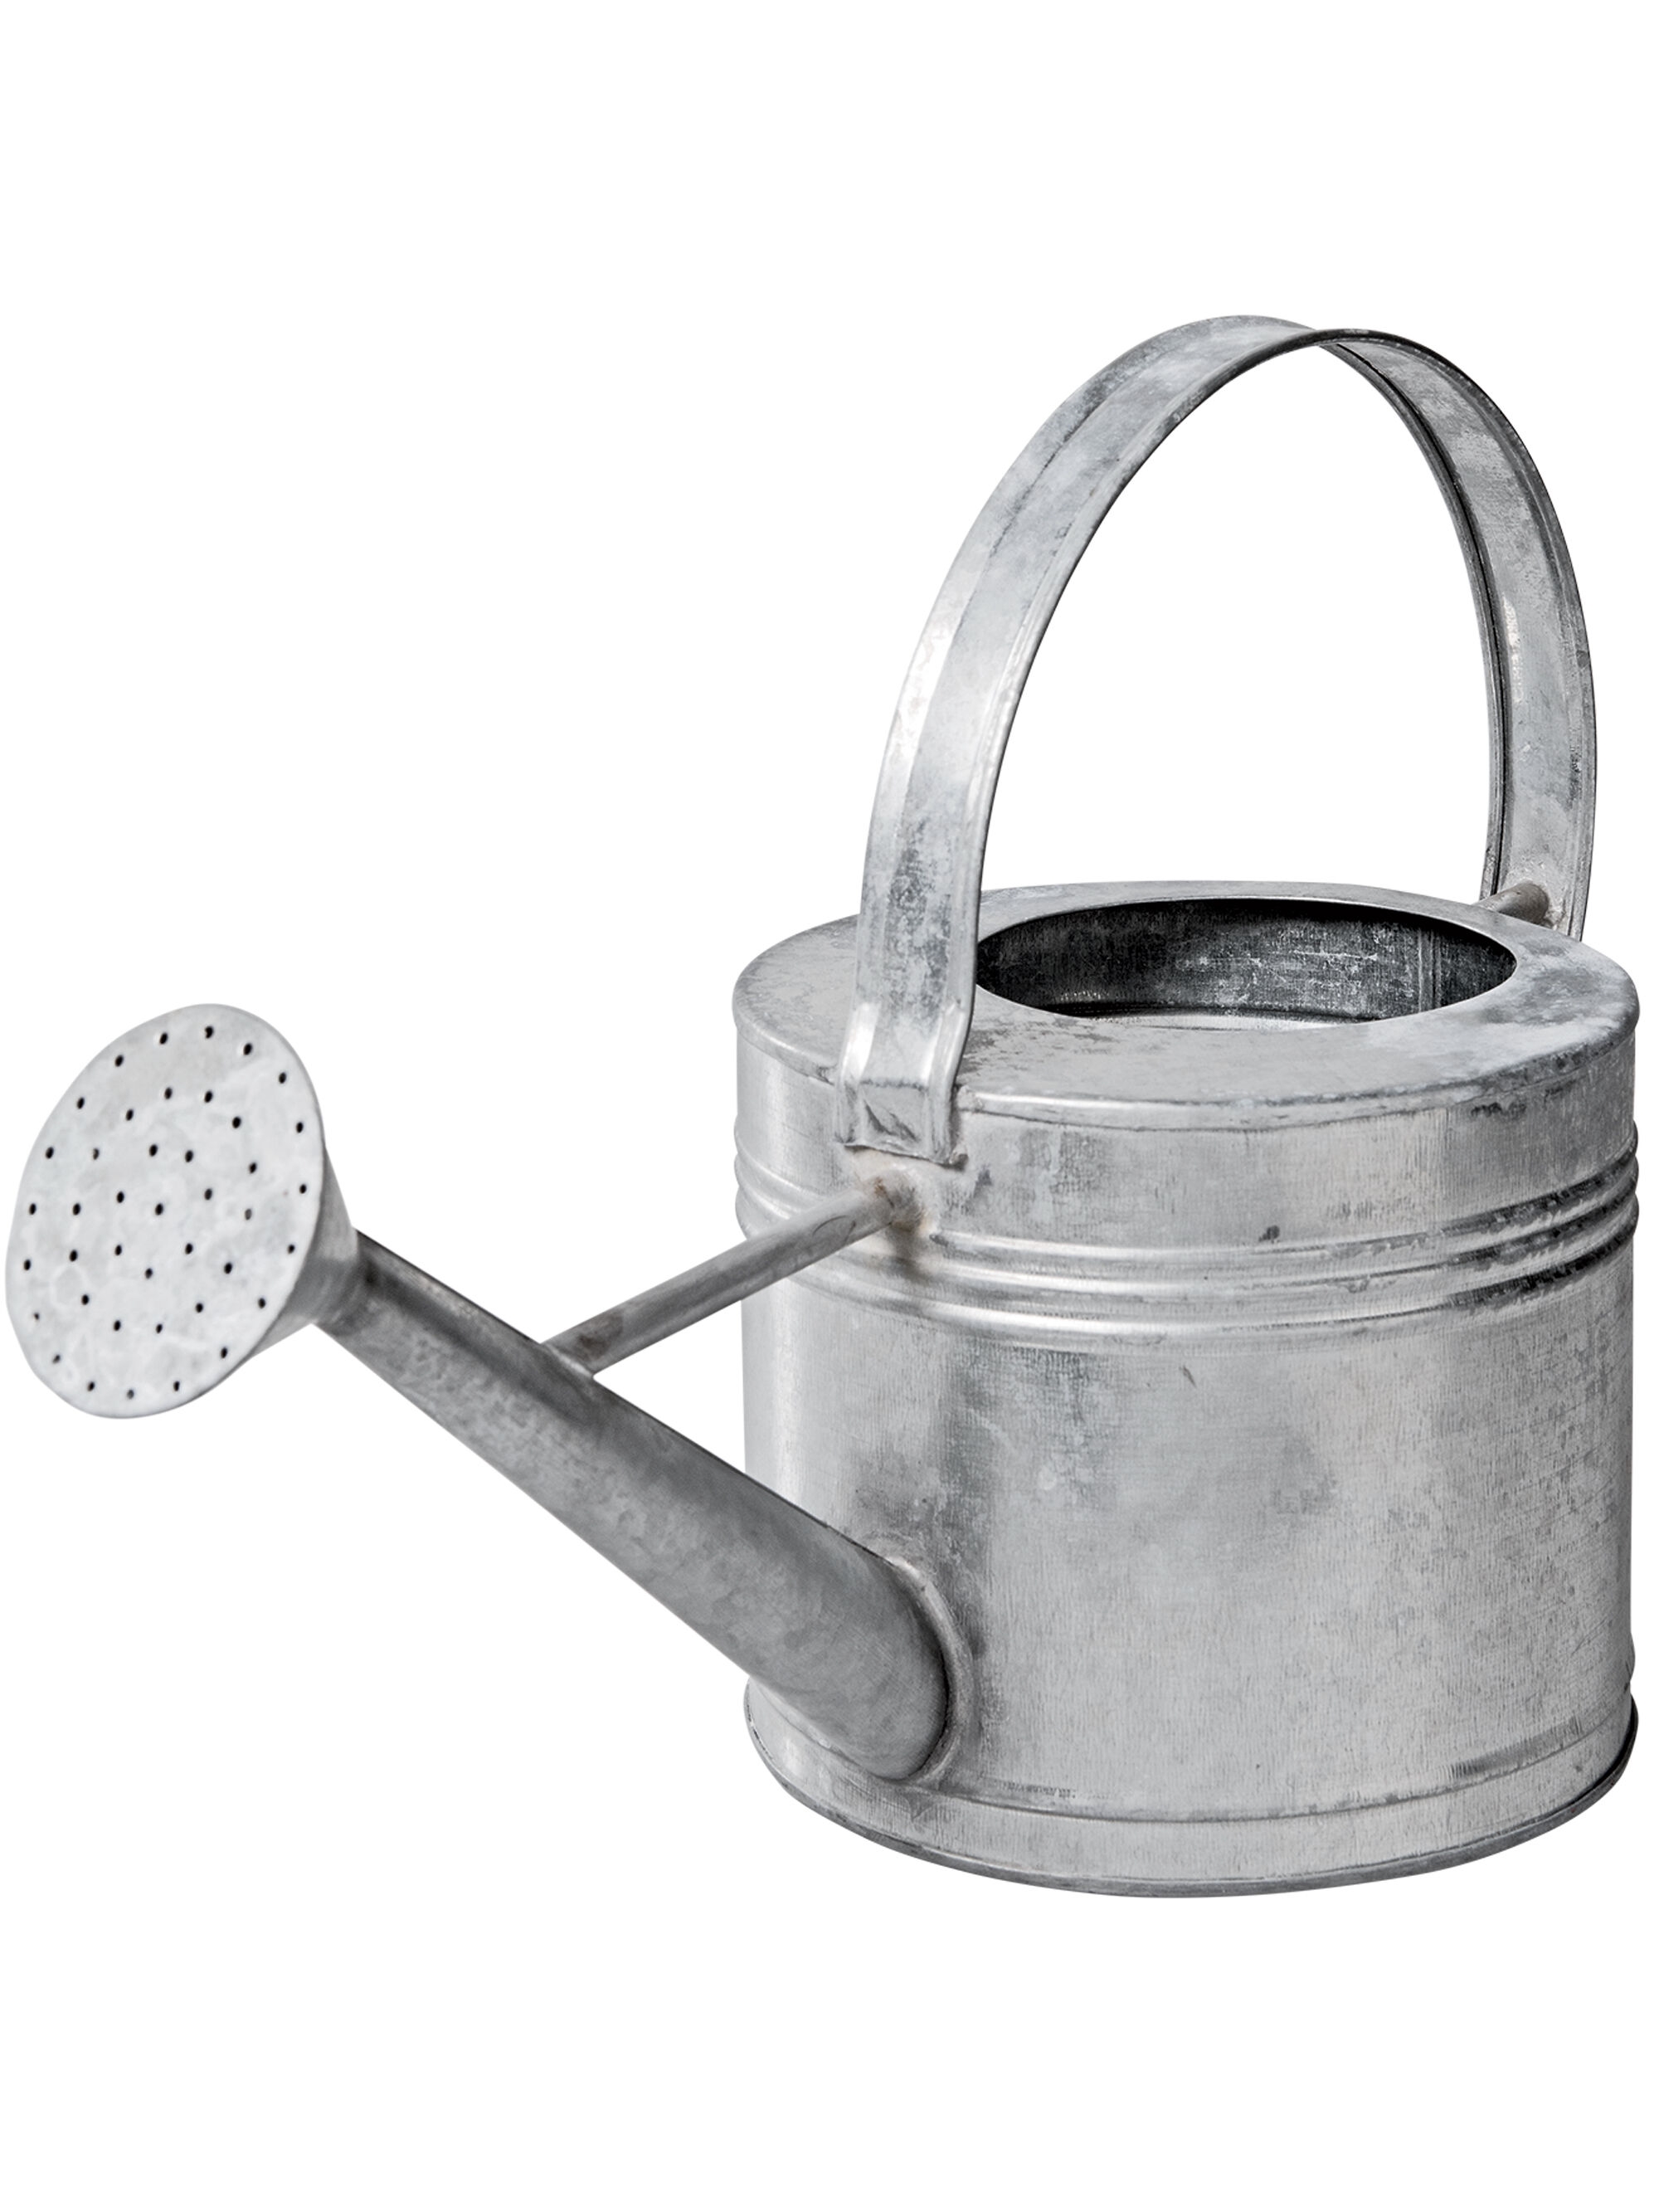 Galvanized Metal Watering Can 